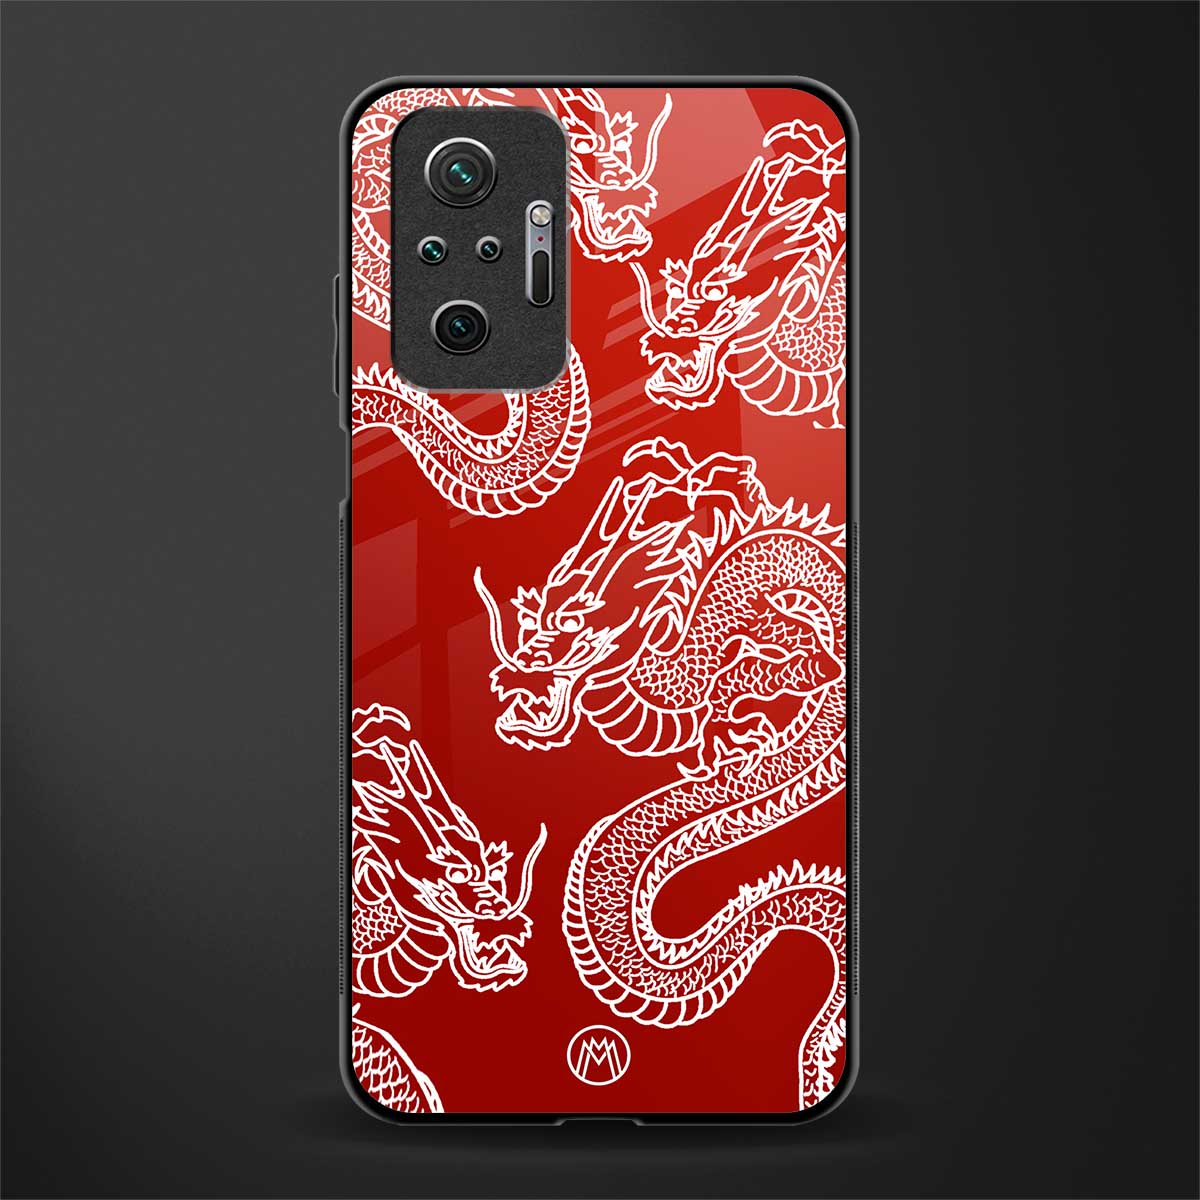 dragons red glass case for redmi note 10 pro image